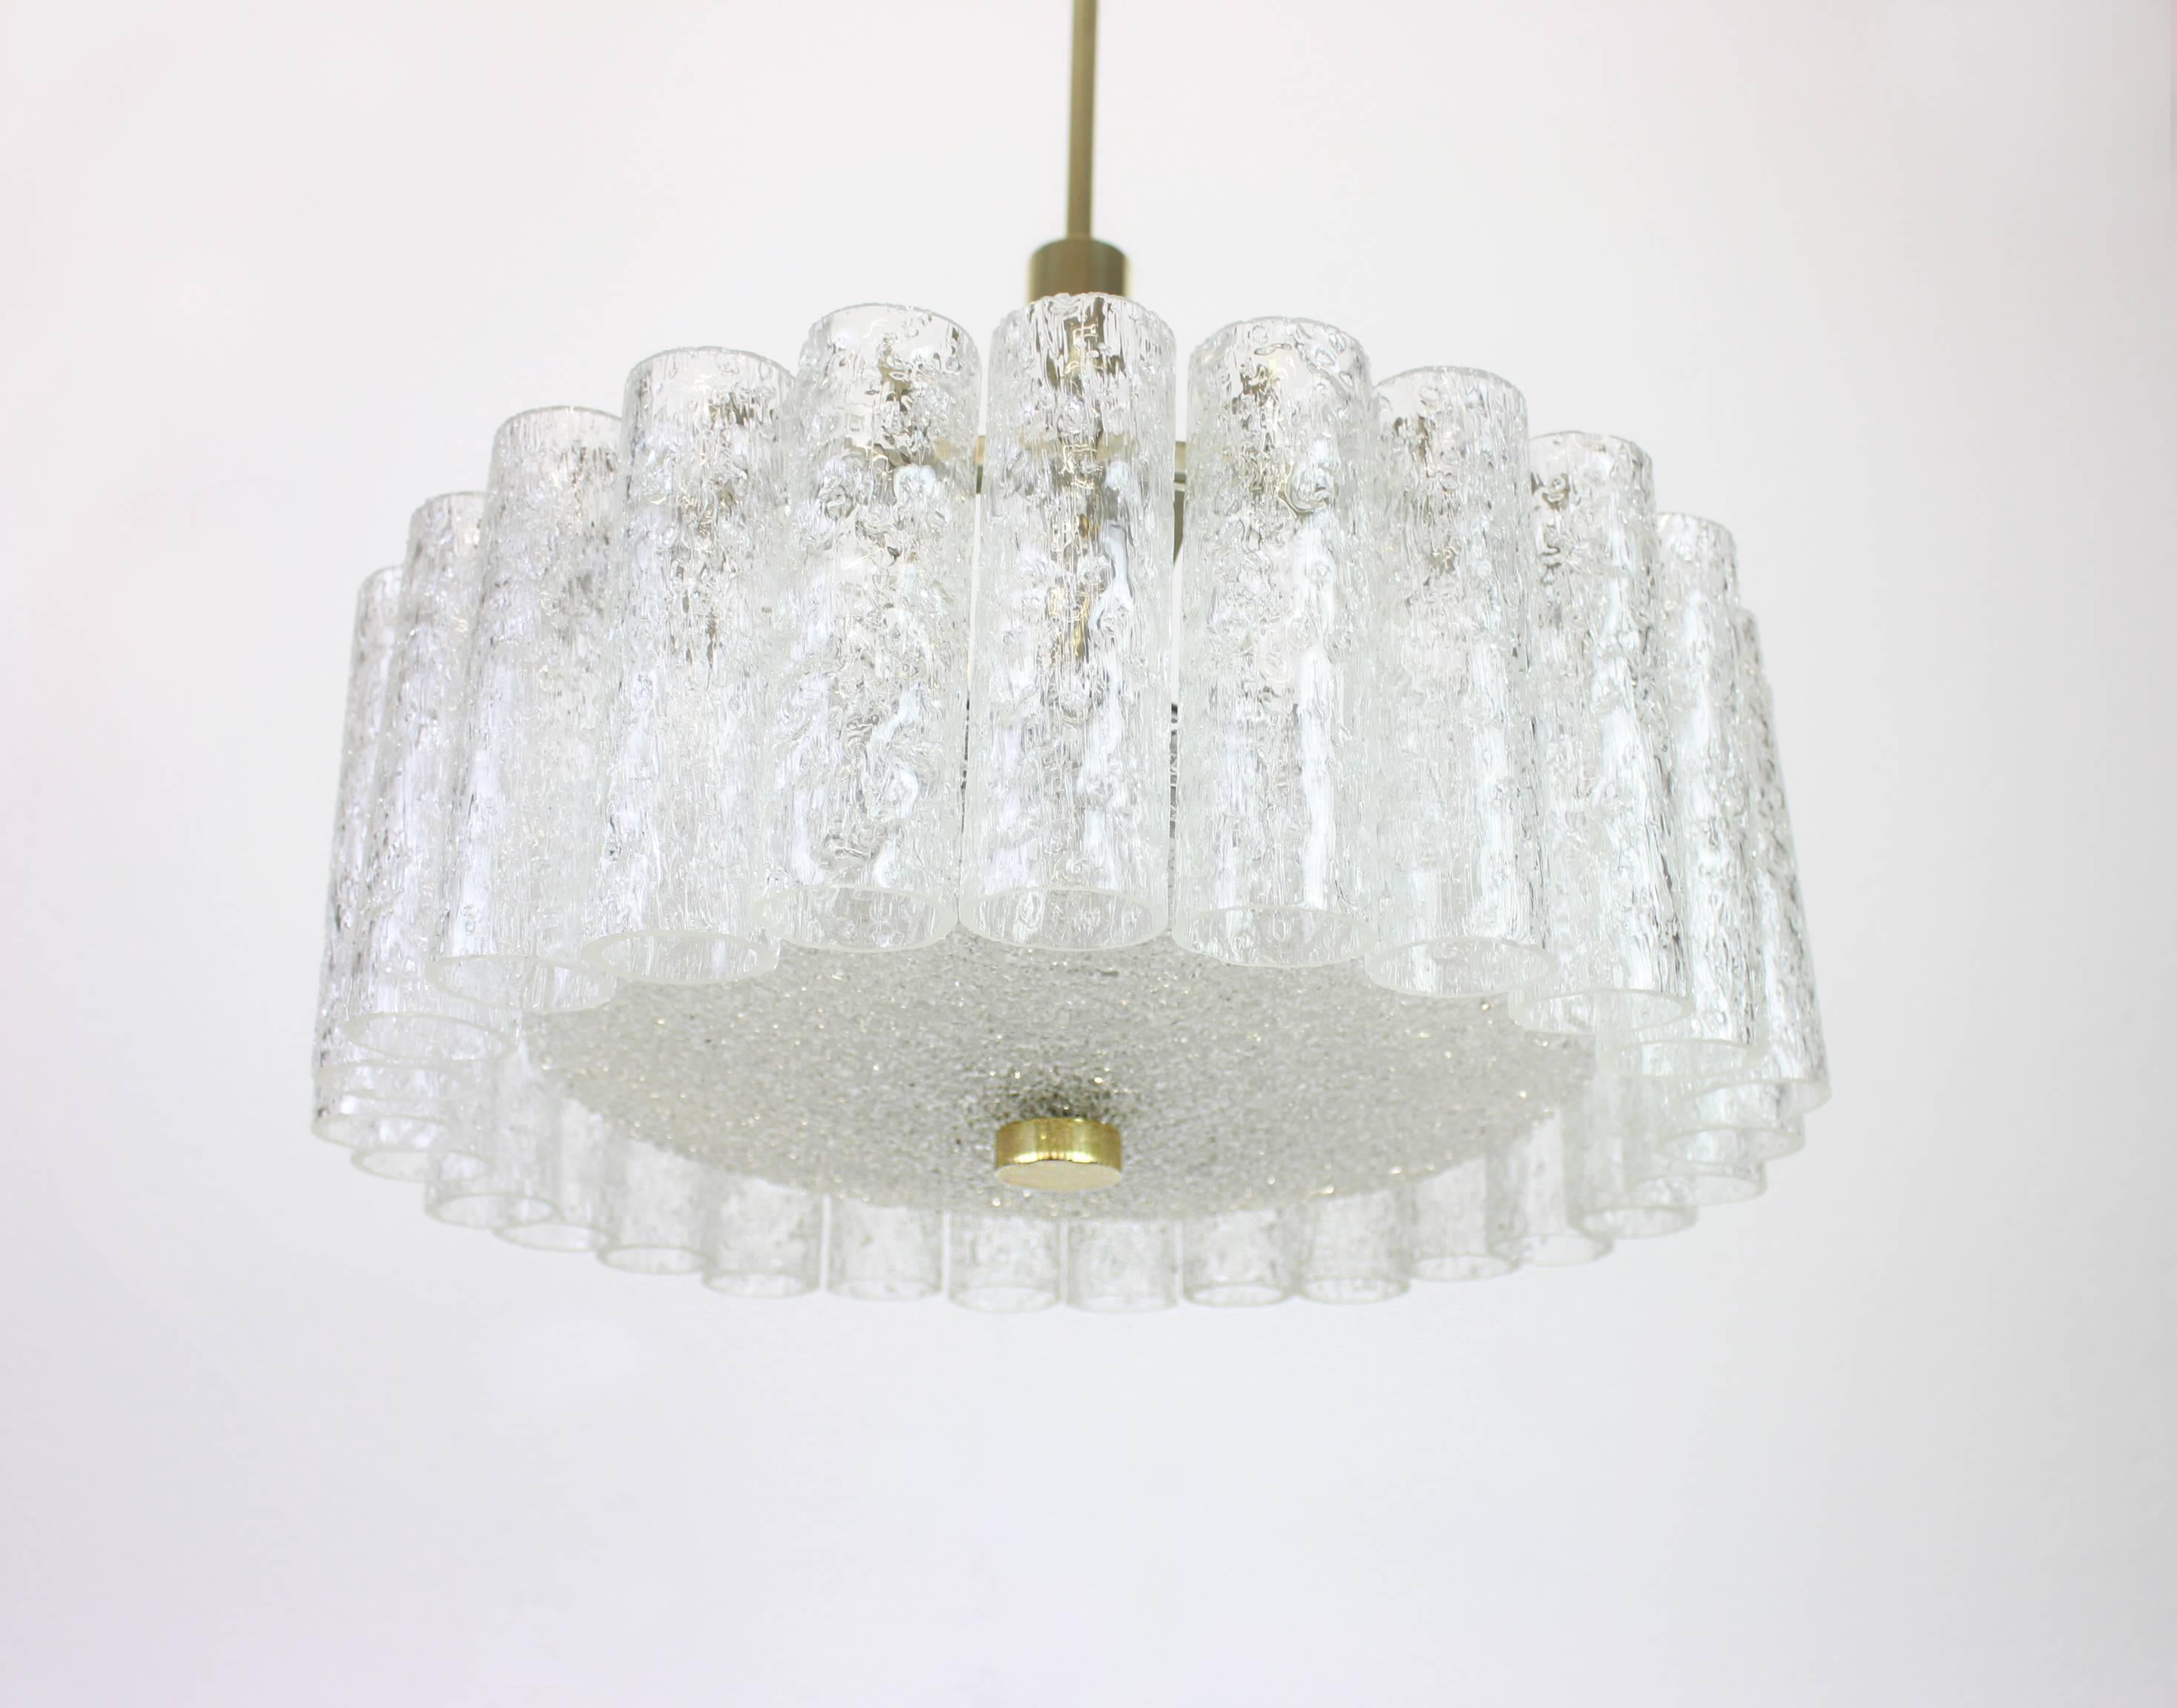 Fantastic Midcentury chandelier by Doria, Germany, manufactured circa 1970-1979, with 27 Murano glass cylinders suspended from a fixture.

High quality and in very good condition. Cleaned, well-wired and ready to use. 

The fixture requires 6 x E14